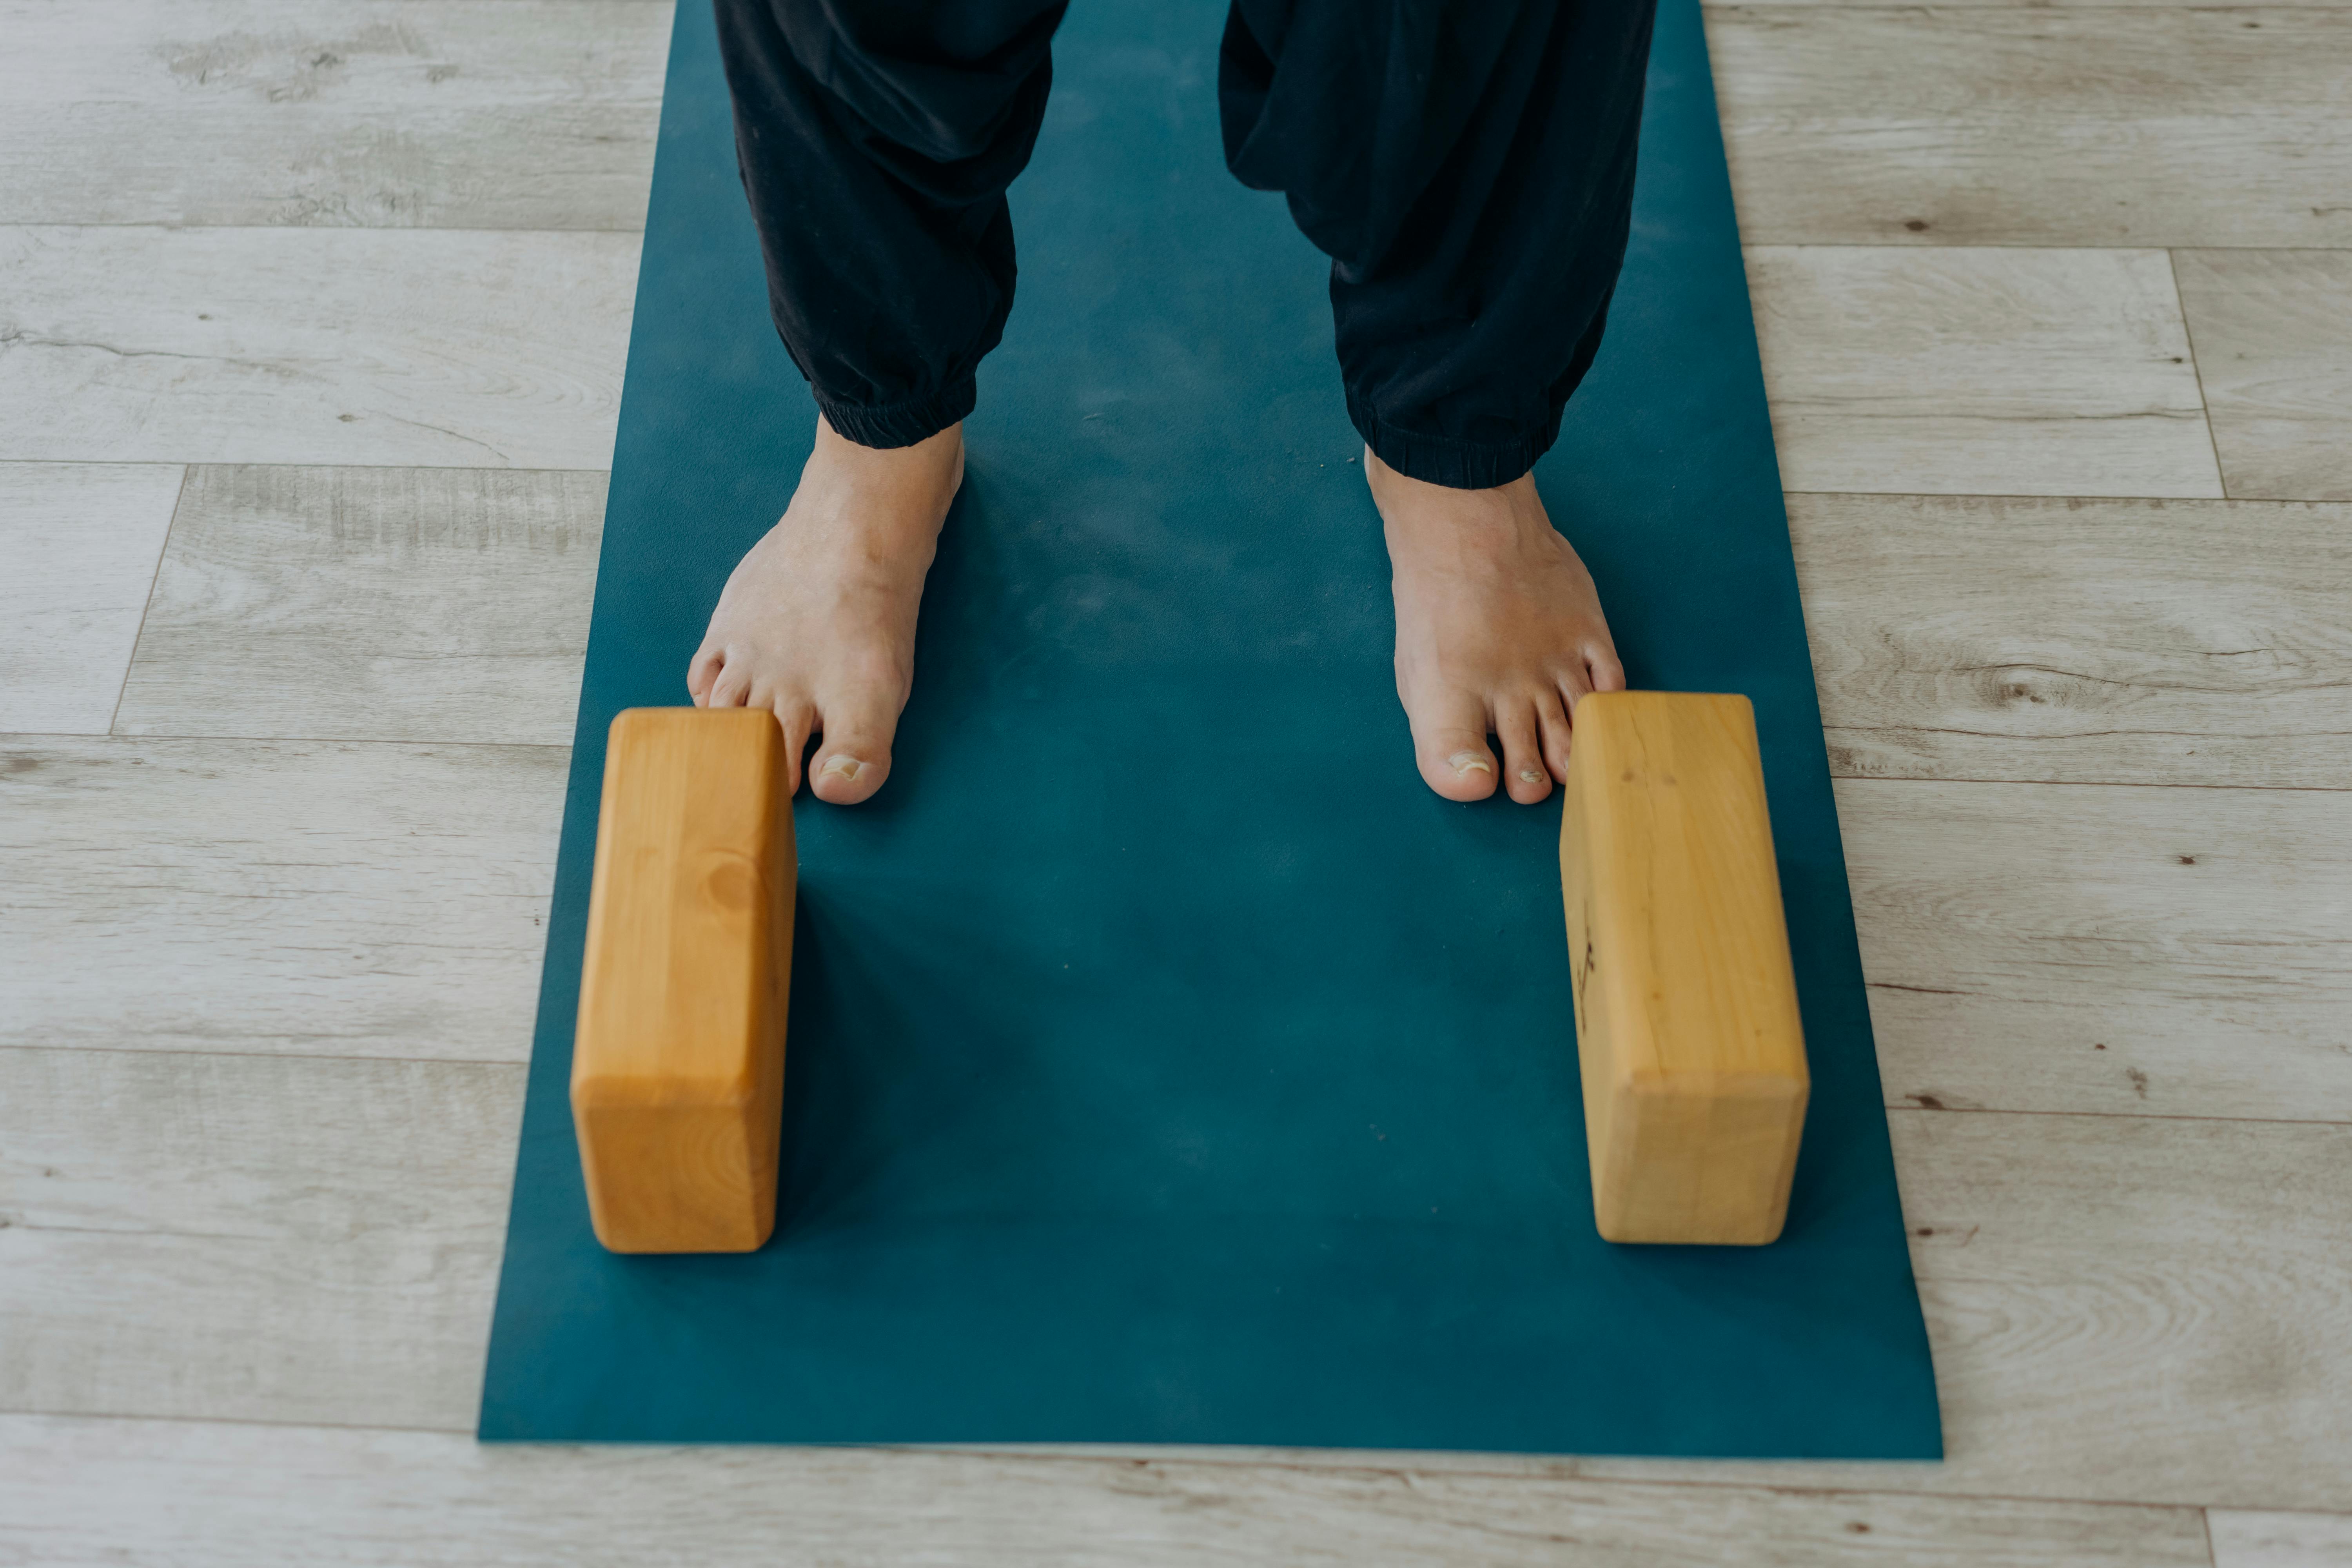 Two sets of feets on a yoga mat with blocks on each side of the feet.